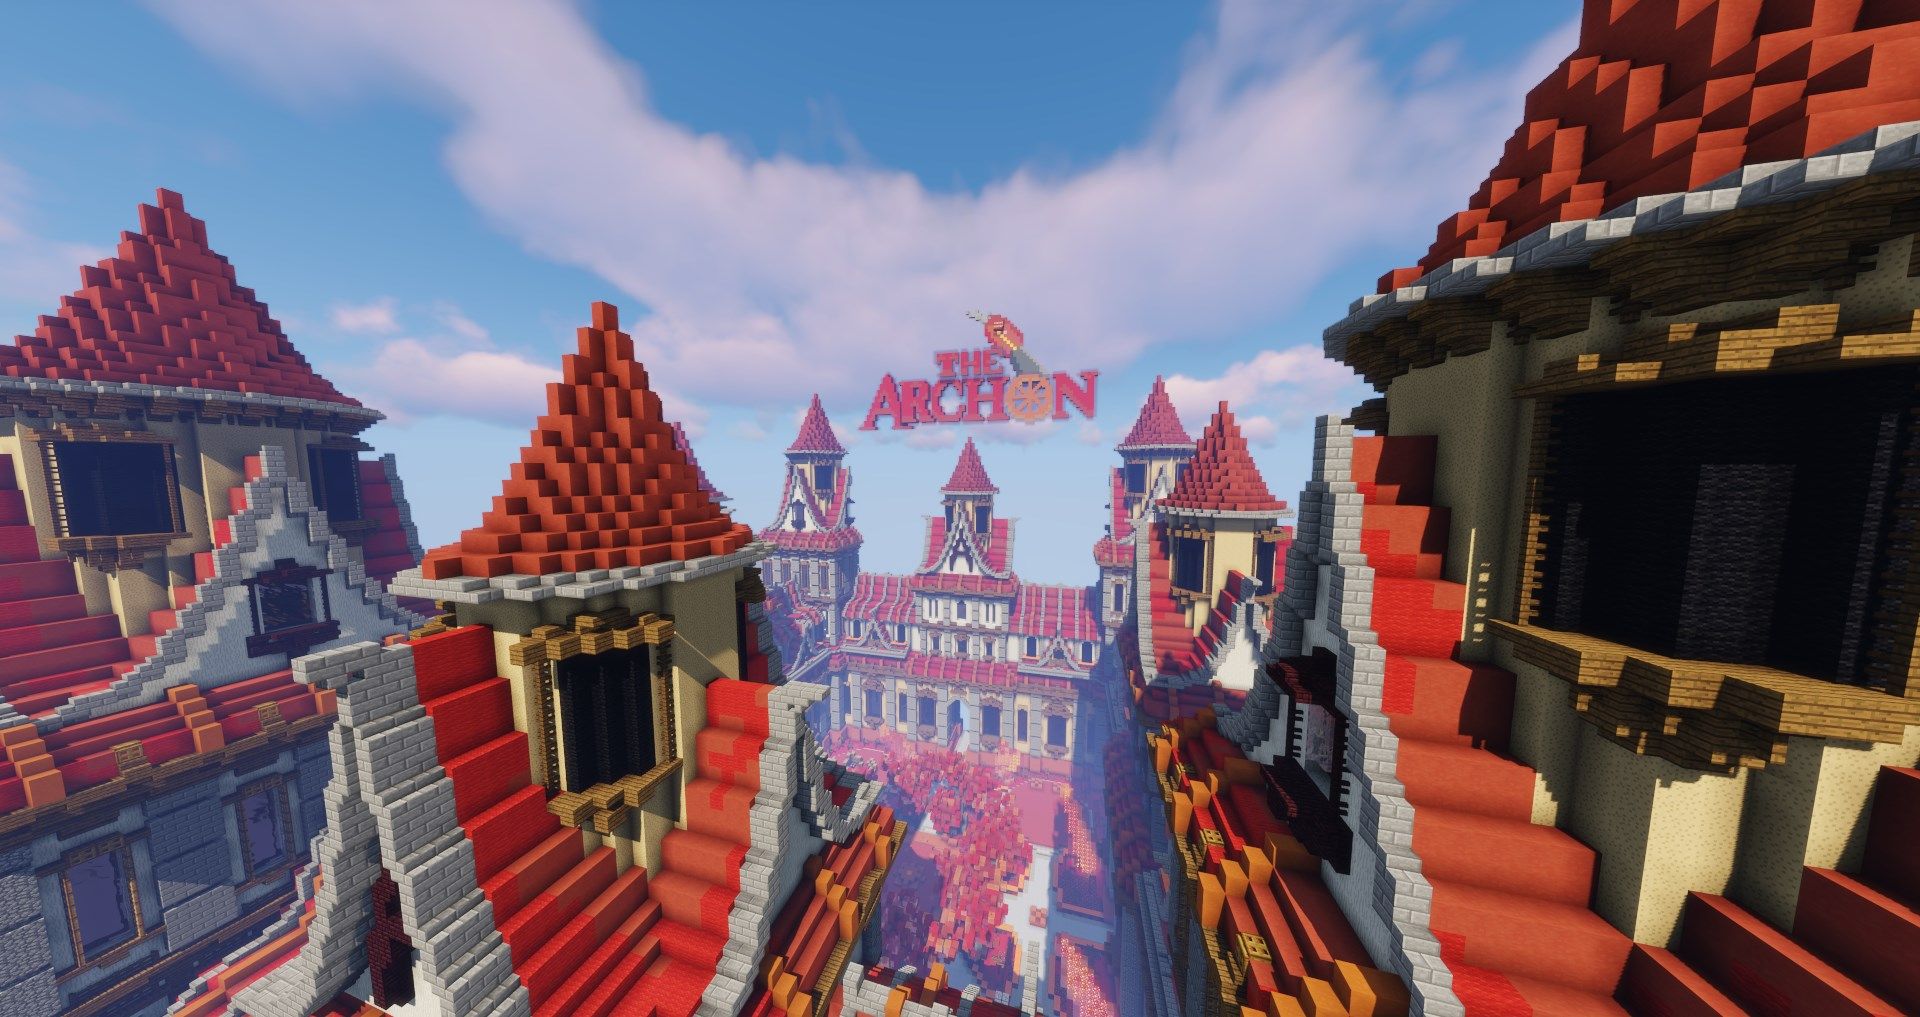 Best Minecraft servers: towering red buildings against a blue sky in The Archon.